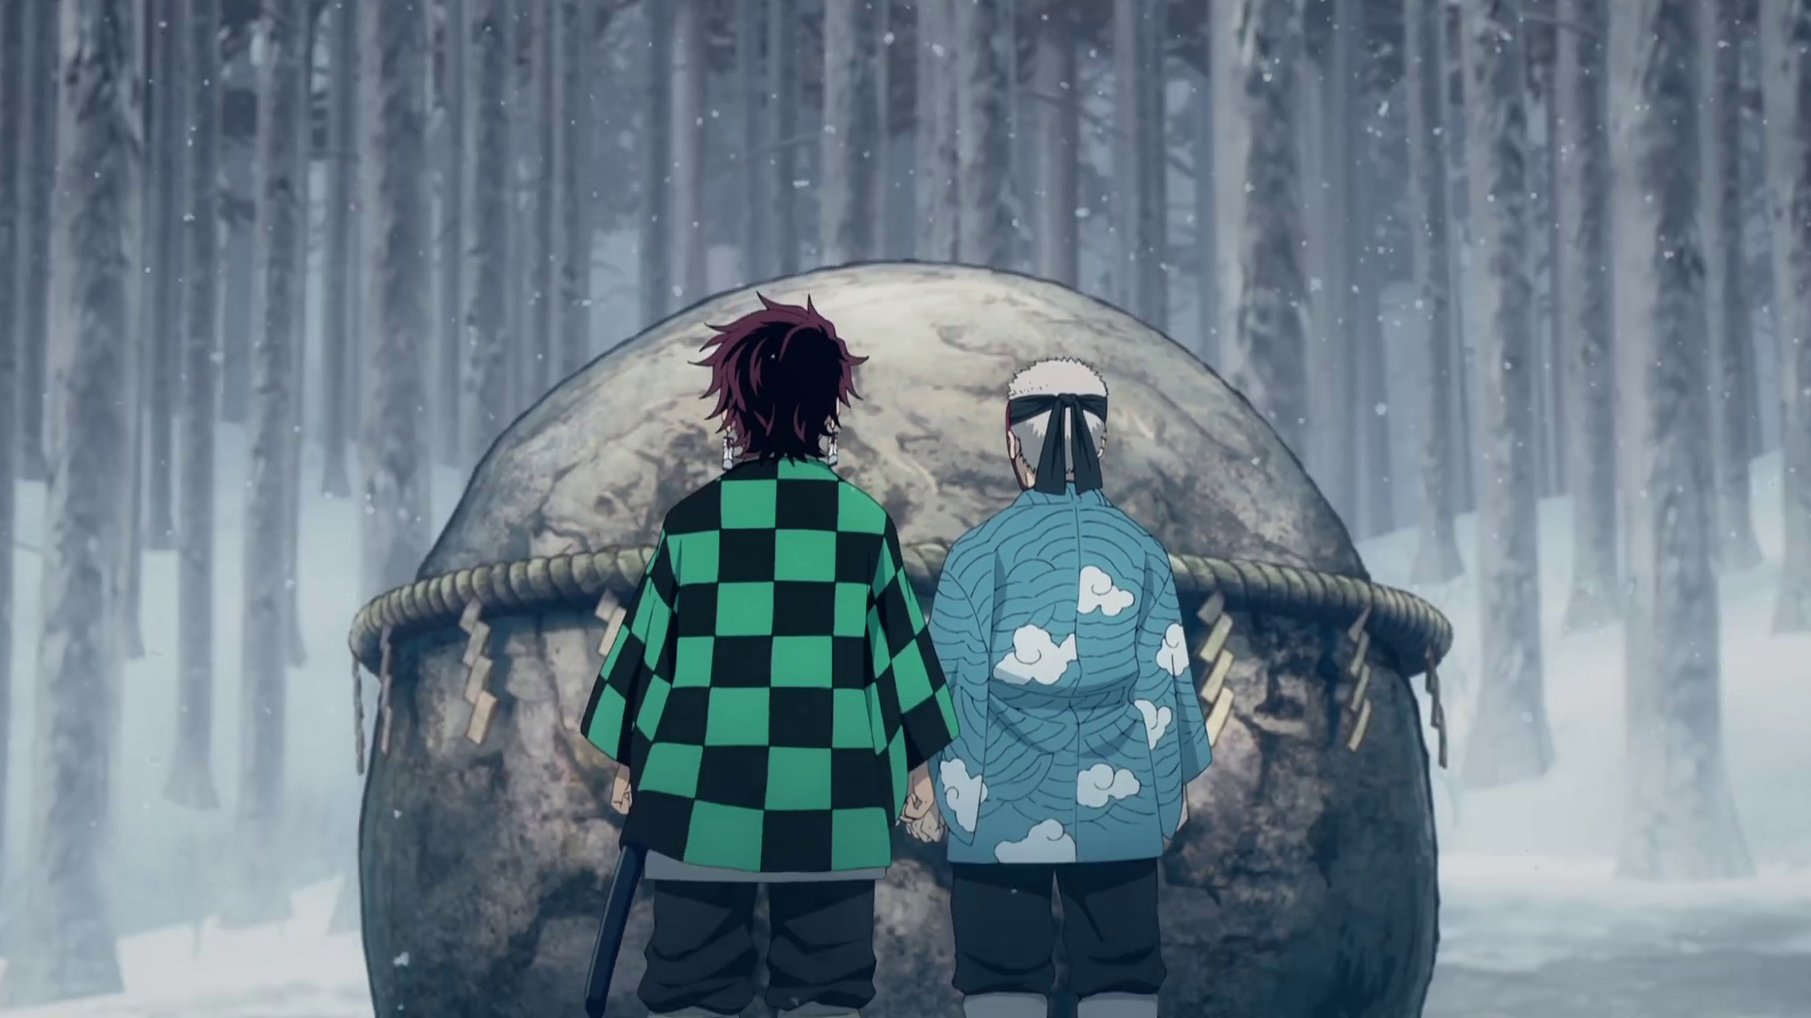 Demon Slayer Final Selection Arc Tanjiro And Urokodaki In Front Of The Boulder